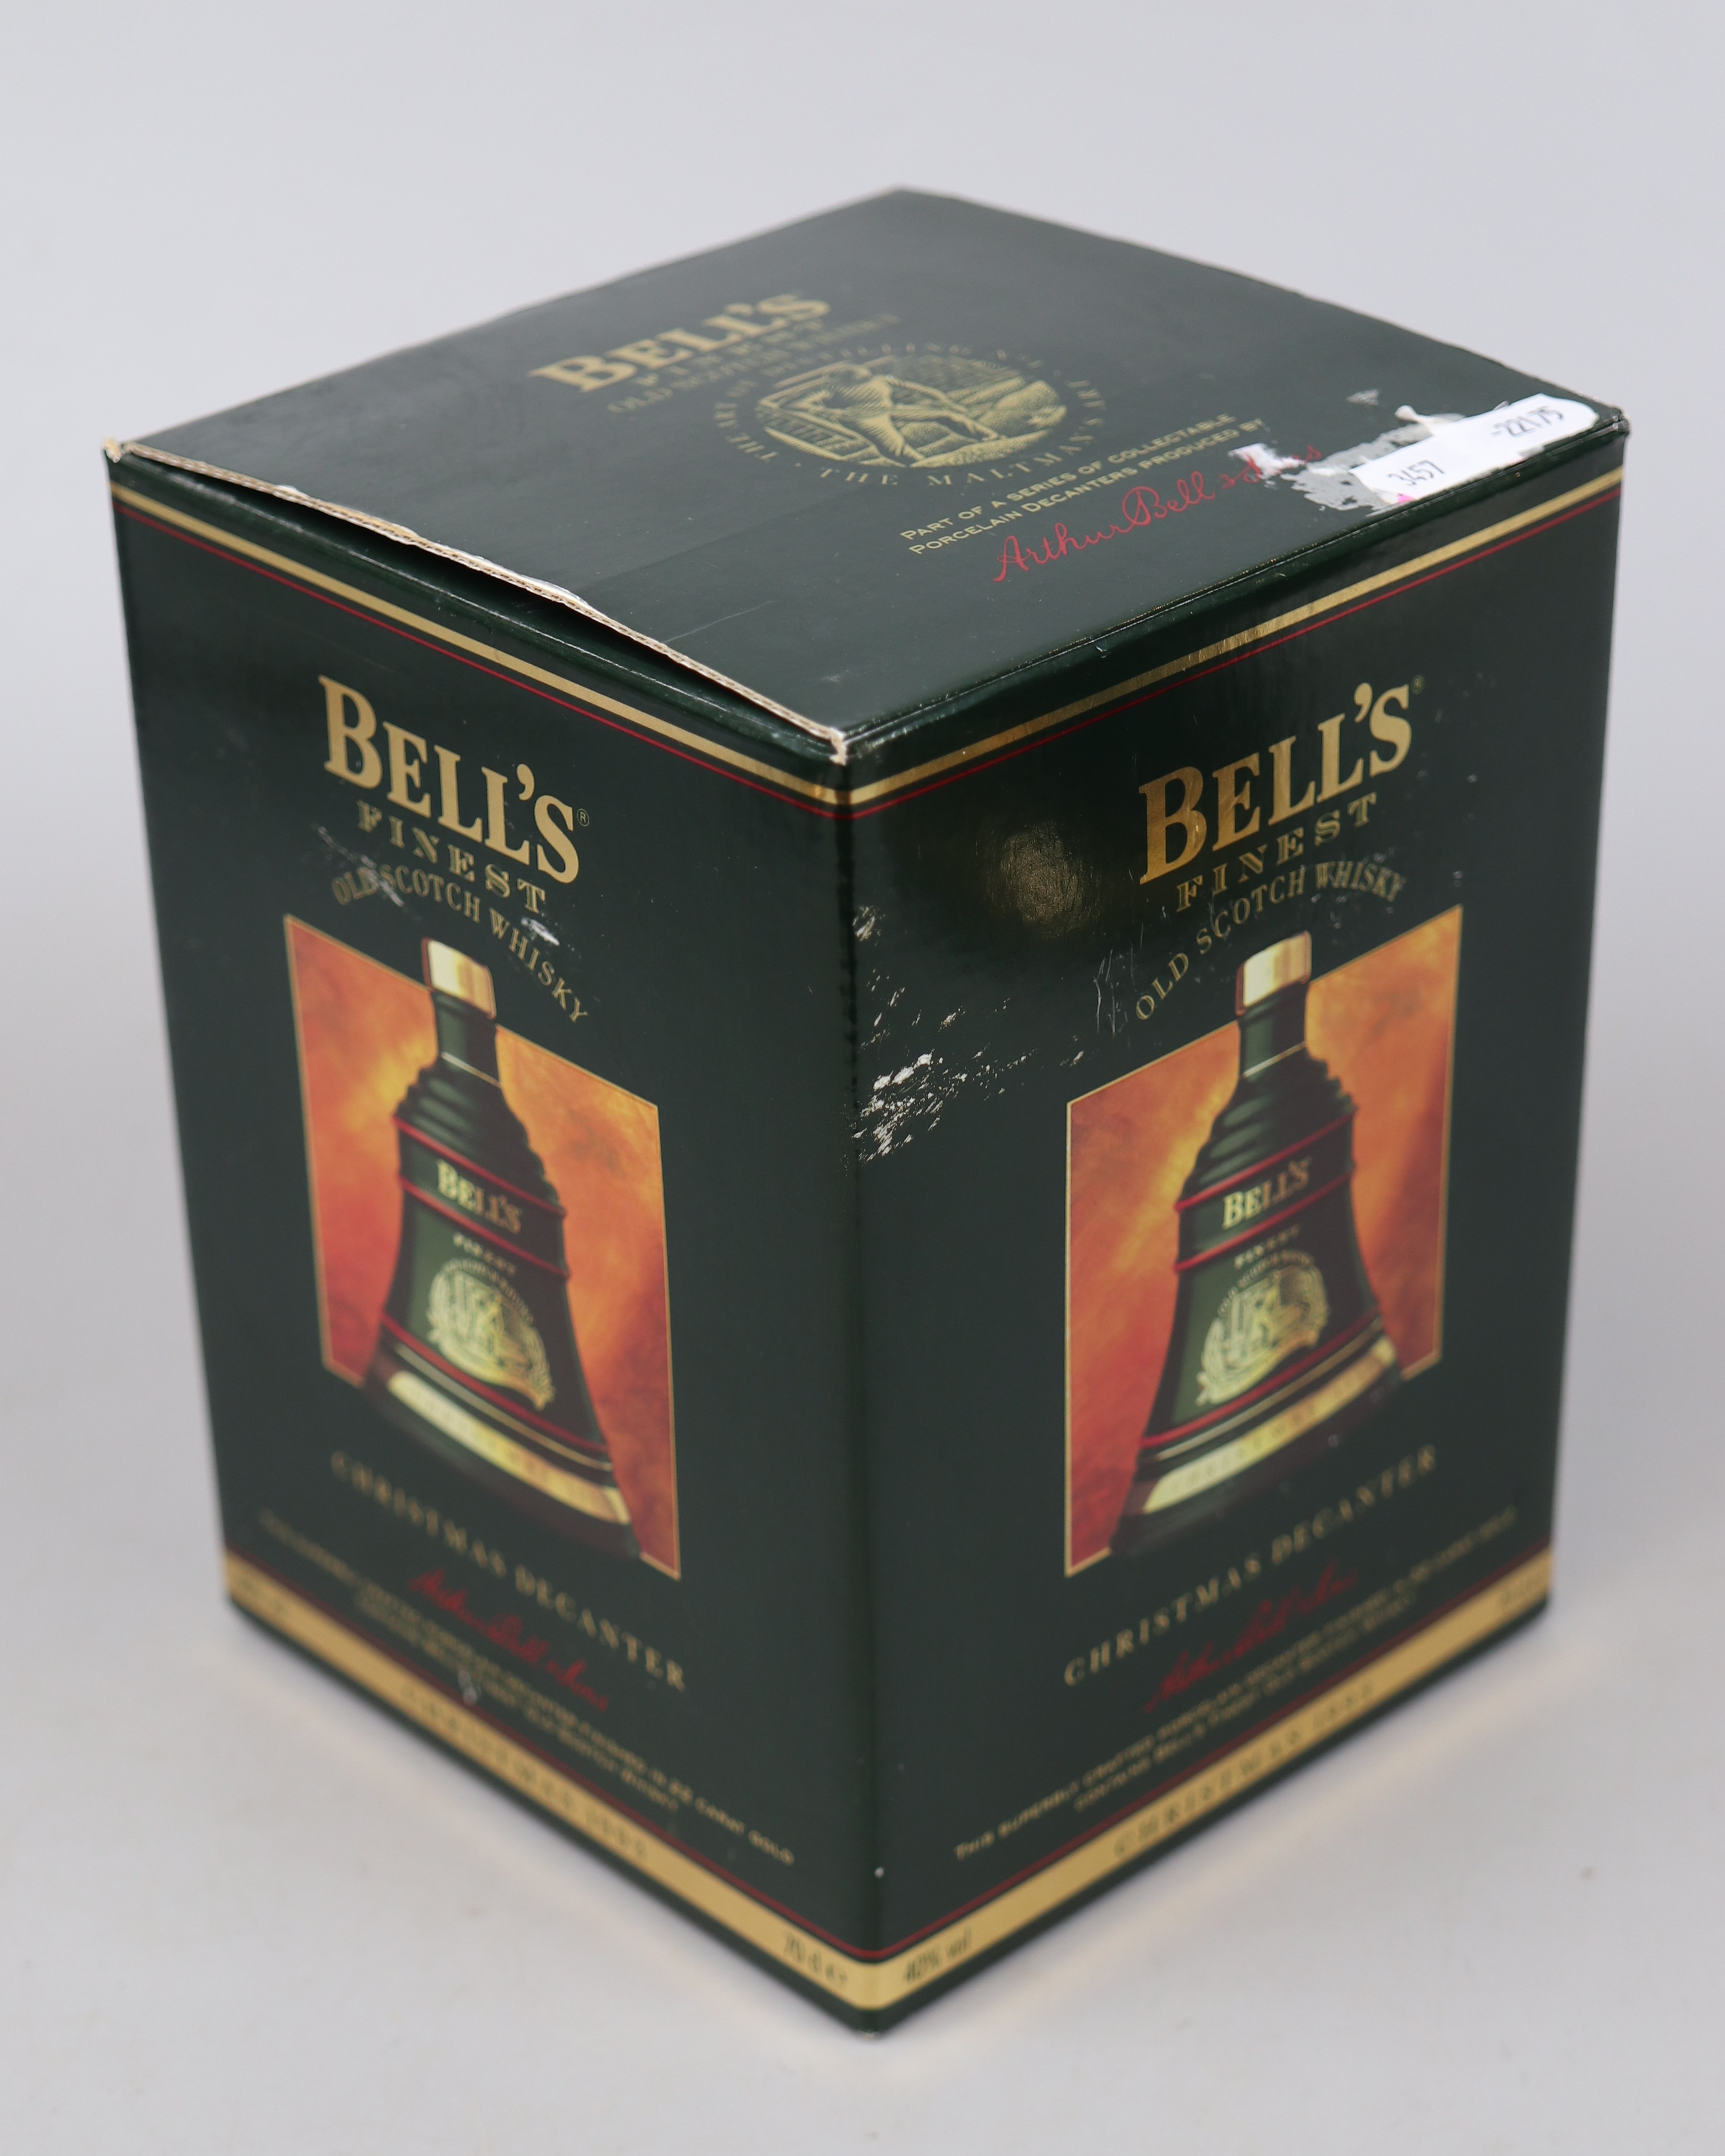 2 Bells whiskey decanters - Full & sealed in original boxes - Image 5 of 9